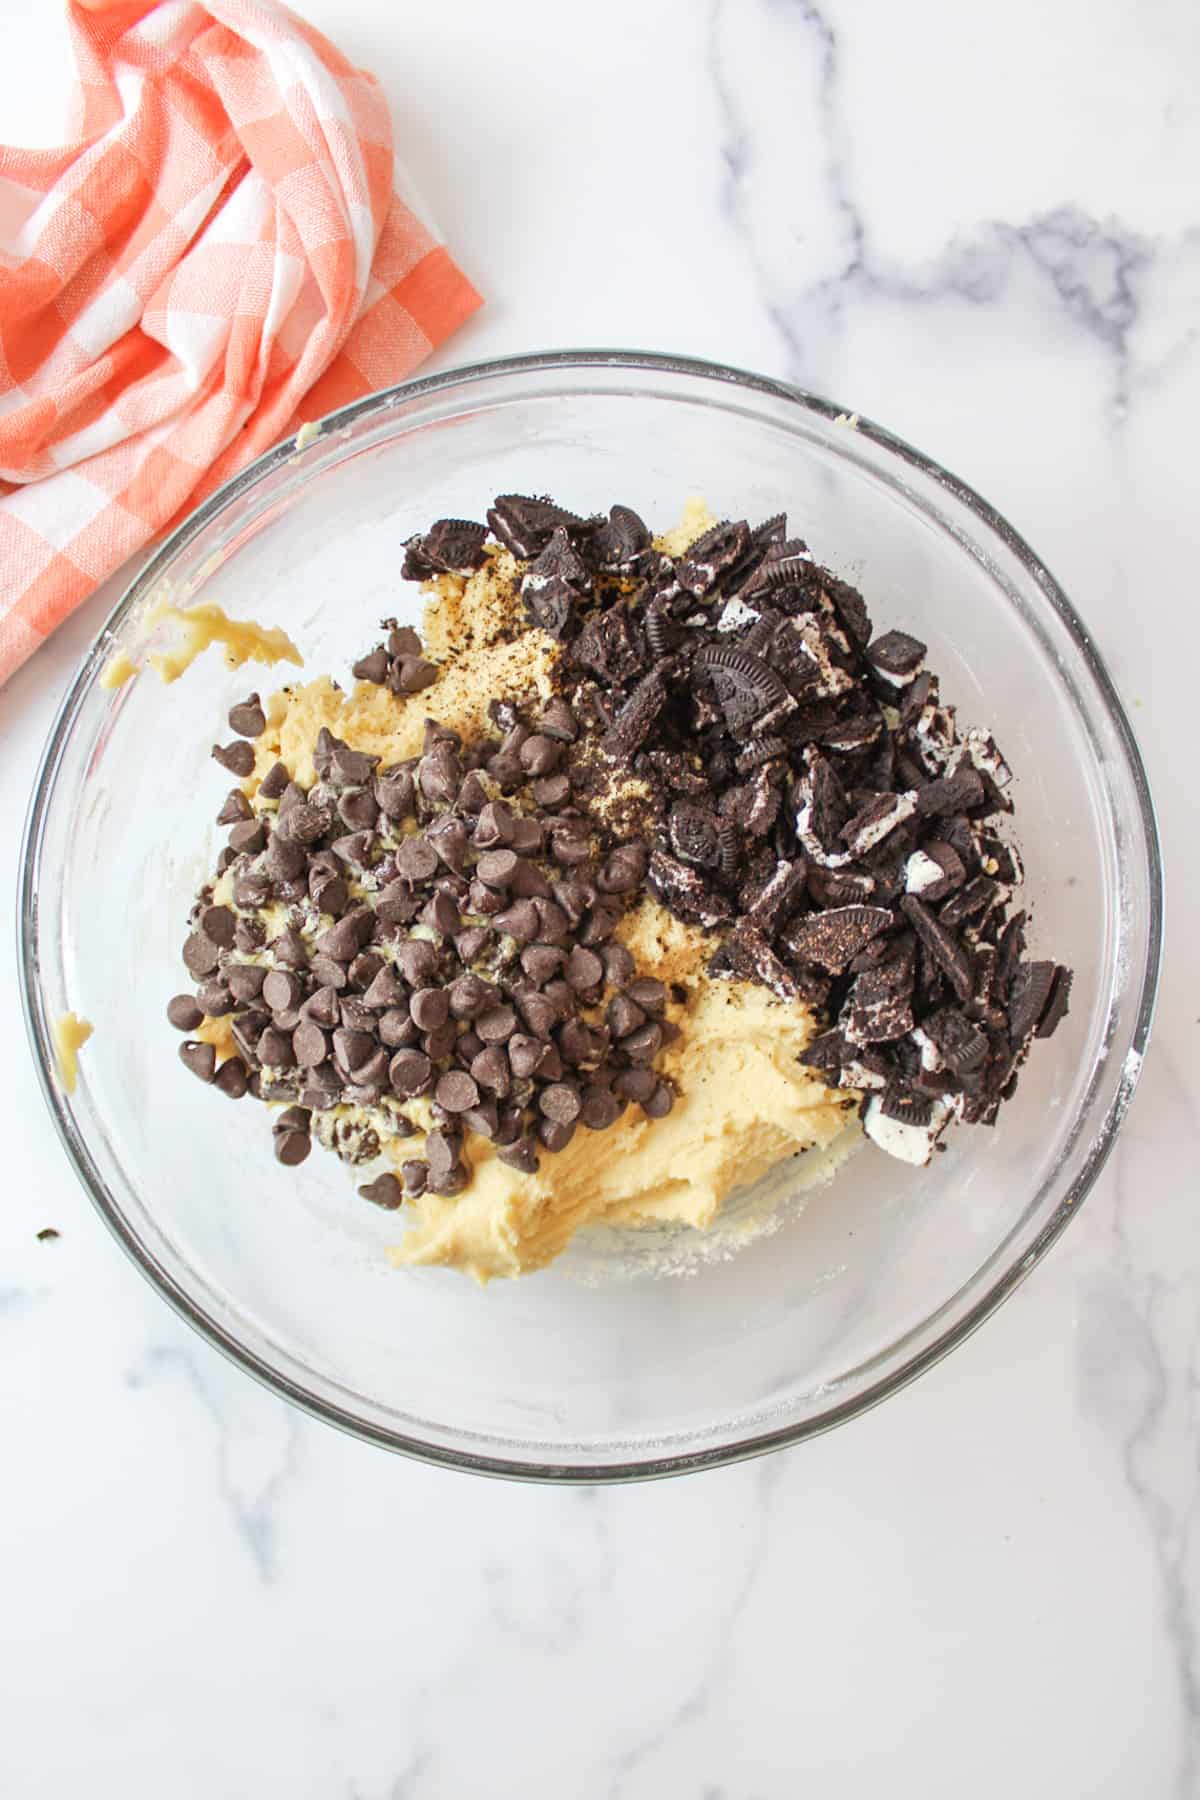 cookie dough in a mixing bowl with crumbled oreo cookies and chocolate chips